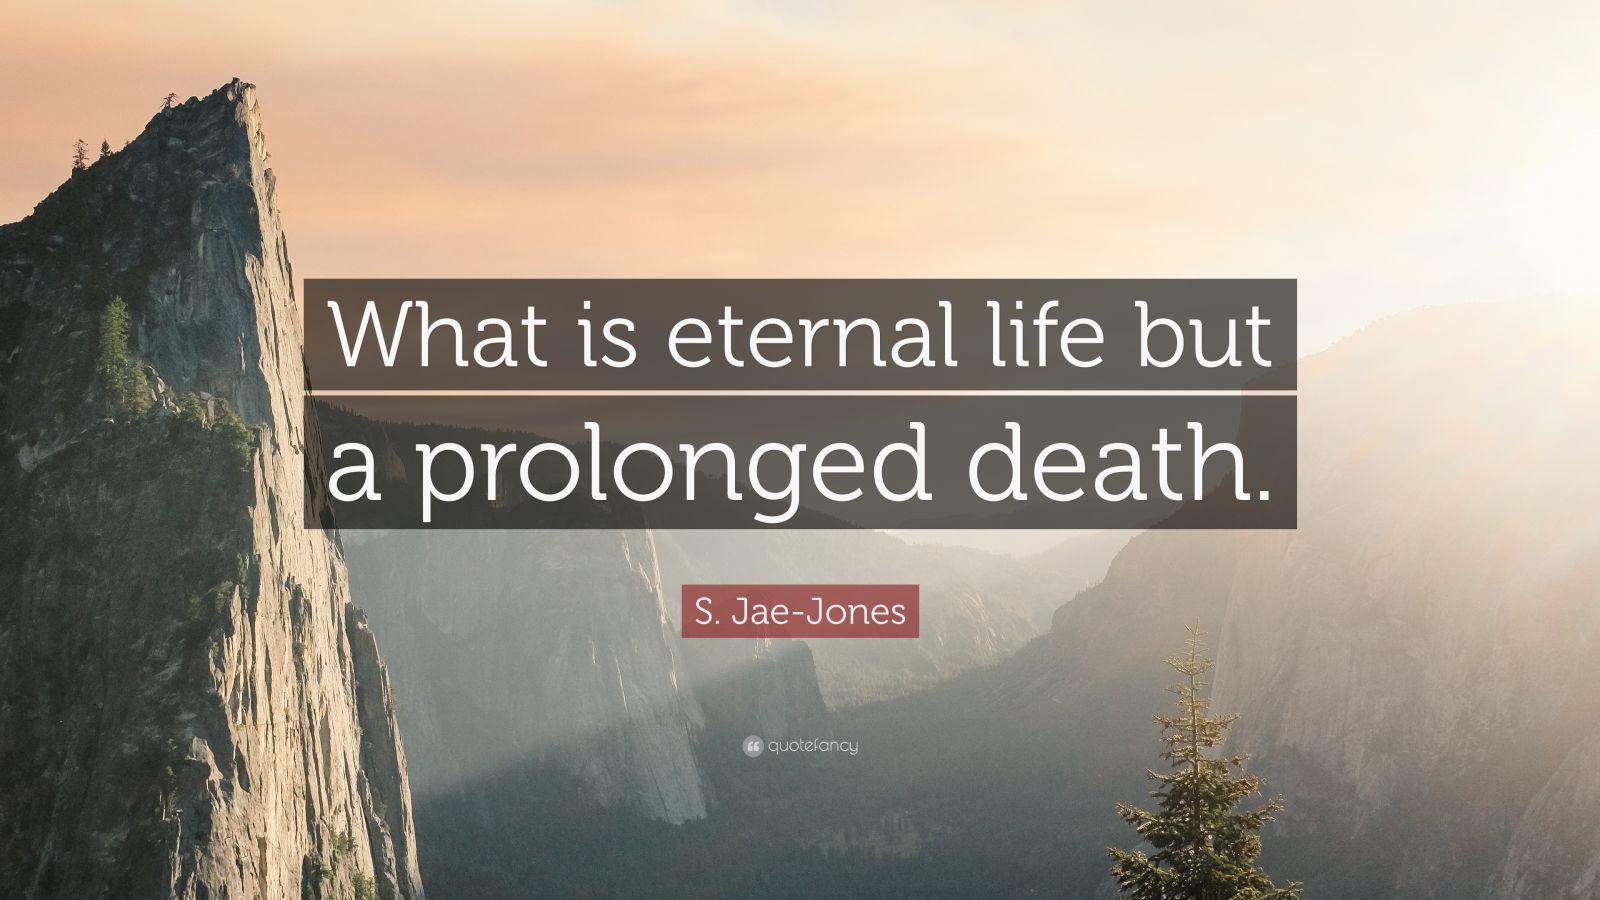 S. Jae-Jones Quote: "What is eternal life but a prolonged death." (2 wallpapers) - Quotefancy